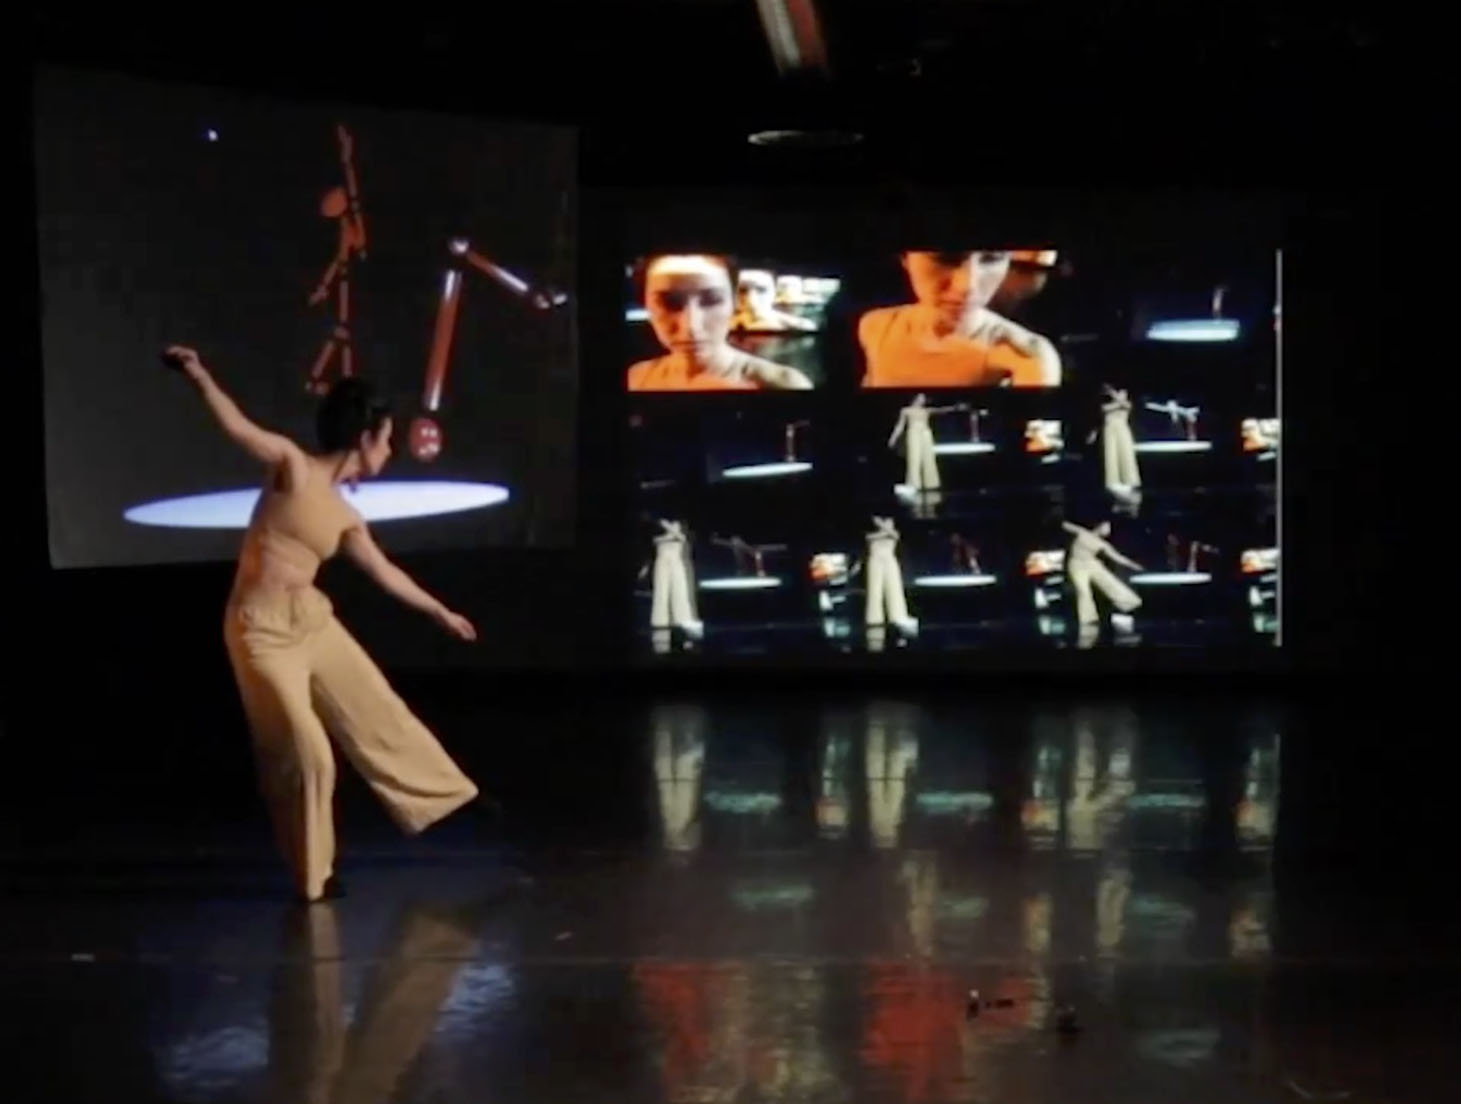 Catie dancing in front of a screen with multiple time-lapsed versions of her live performance